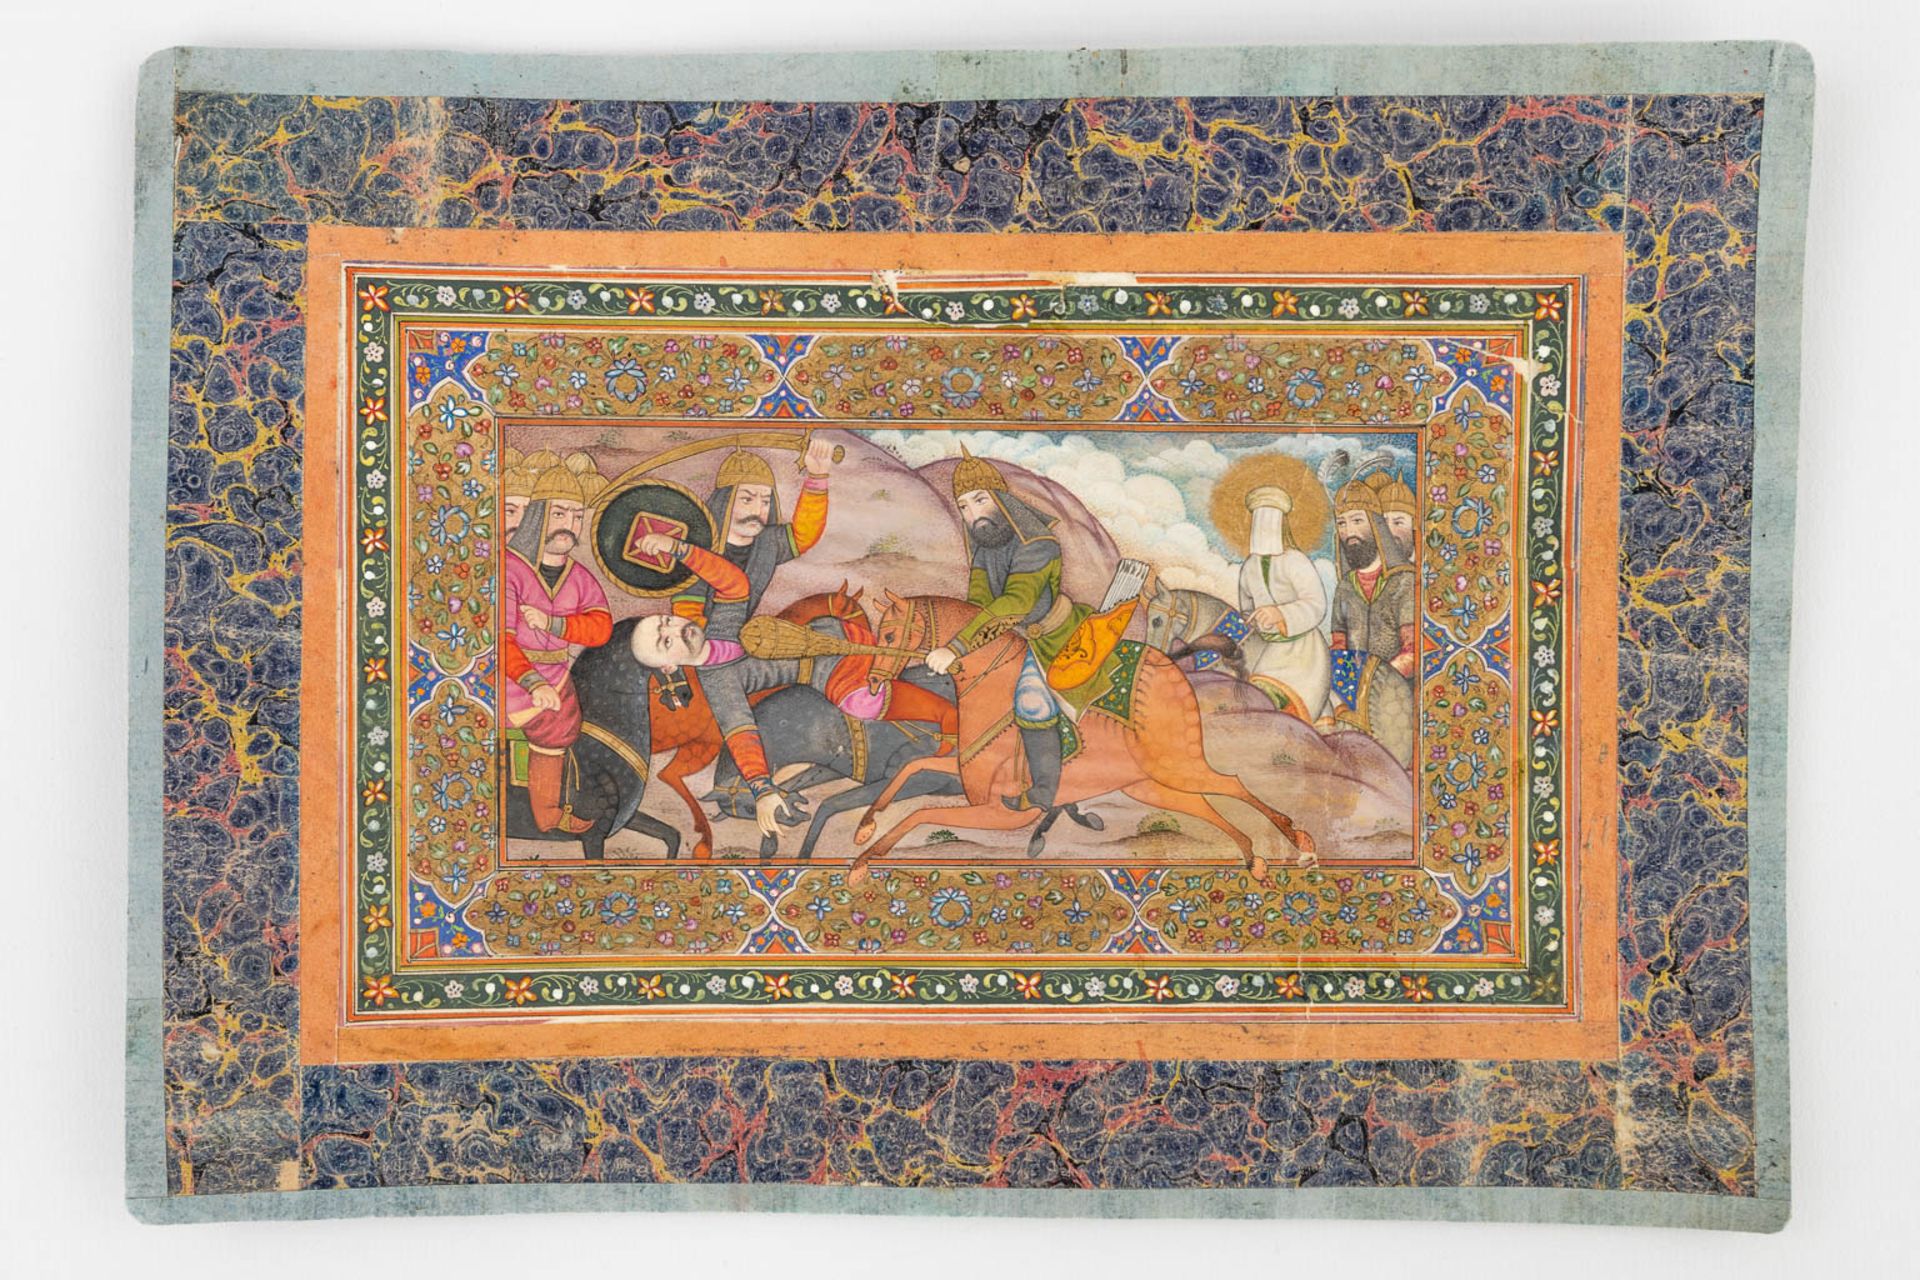 A Qajar miniature painting of the Karbala battle, Persia, 19th C. (W:25,5 x H:18 cm) - Image 7 of 7